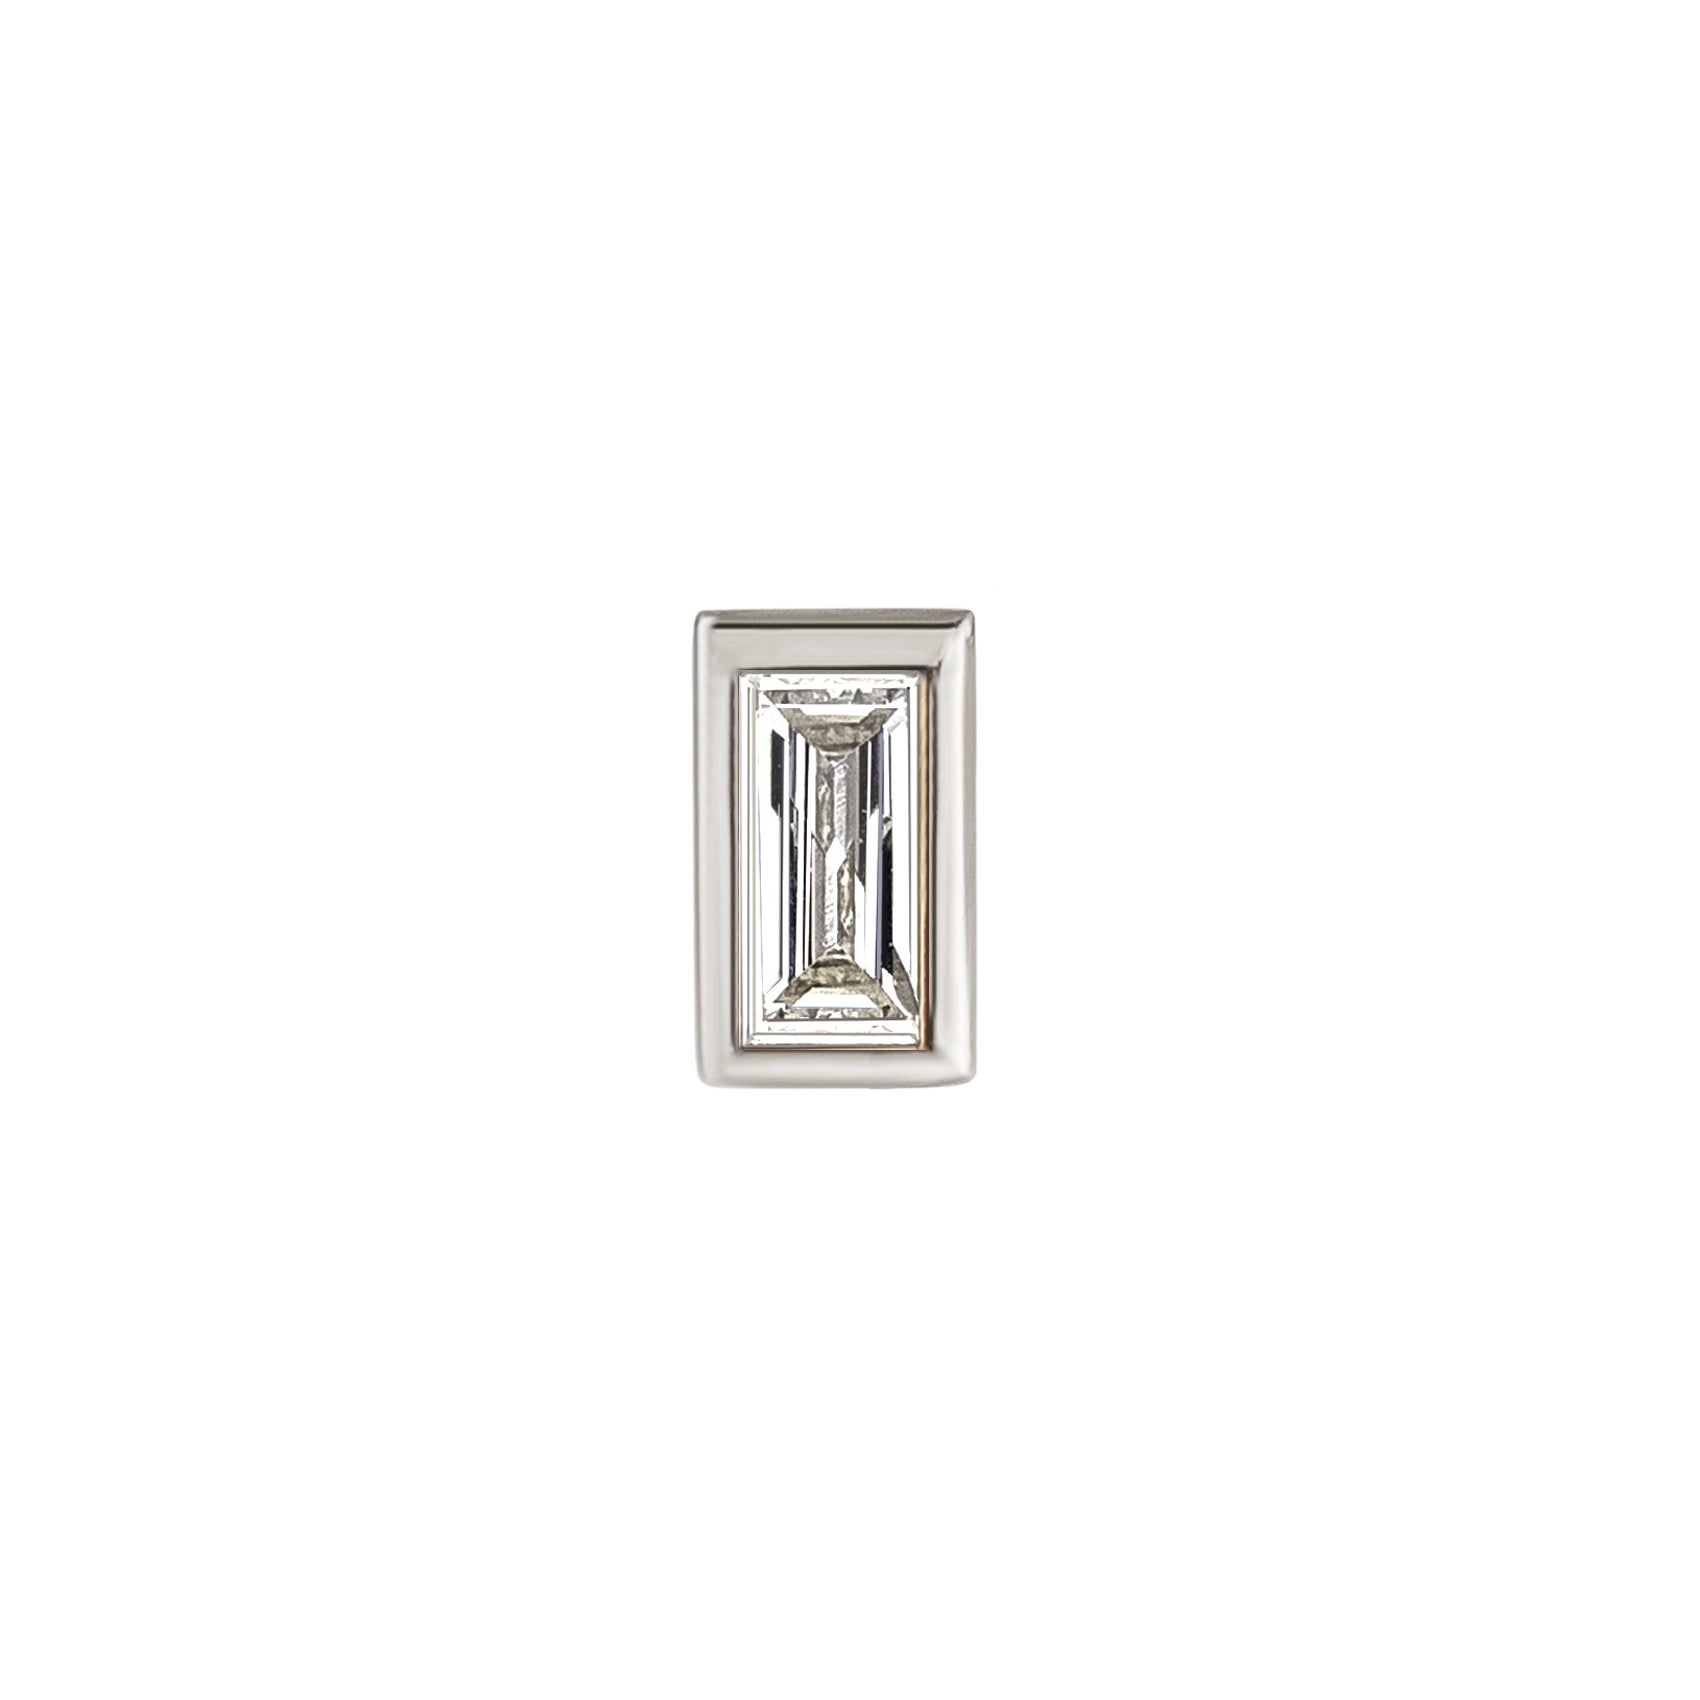 Metier by tomfoolery white gold baguette gemstone stud white diamond